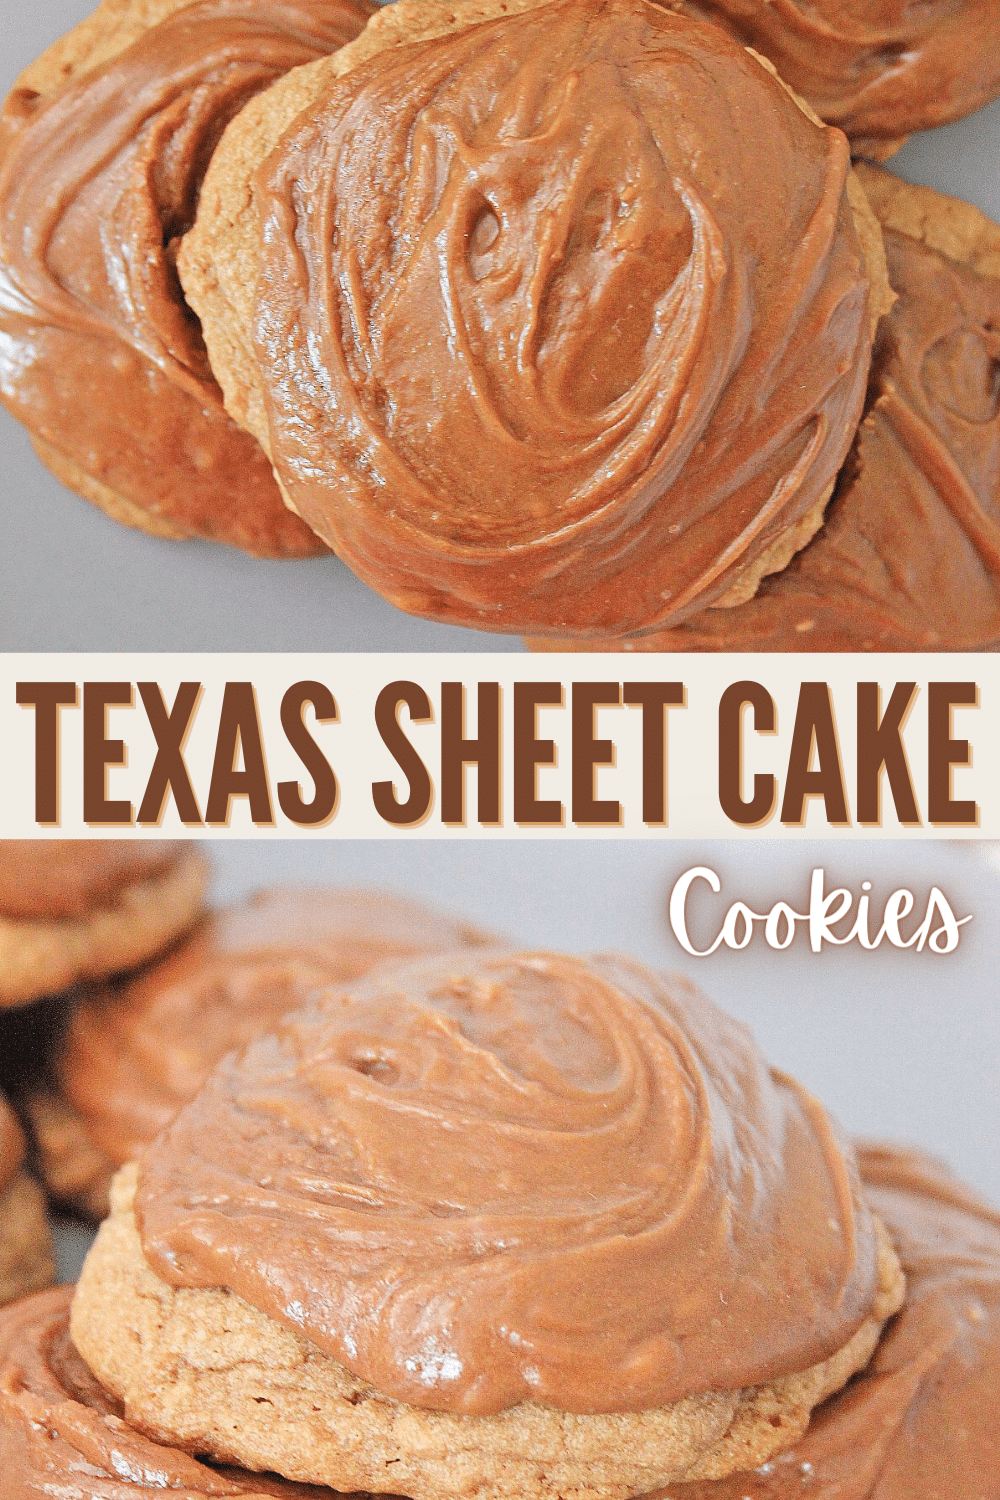 These Texas Sheet Cake Cookies are soft and chewy cookies that are sweet and chocolaty. The cookies are so delicious and everyone loves them! #texassheetcake #cookies #chocolate #chewycookies #recipe via @wondermomwannab